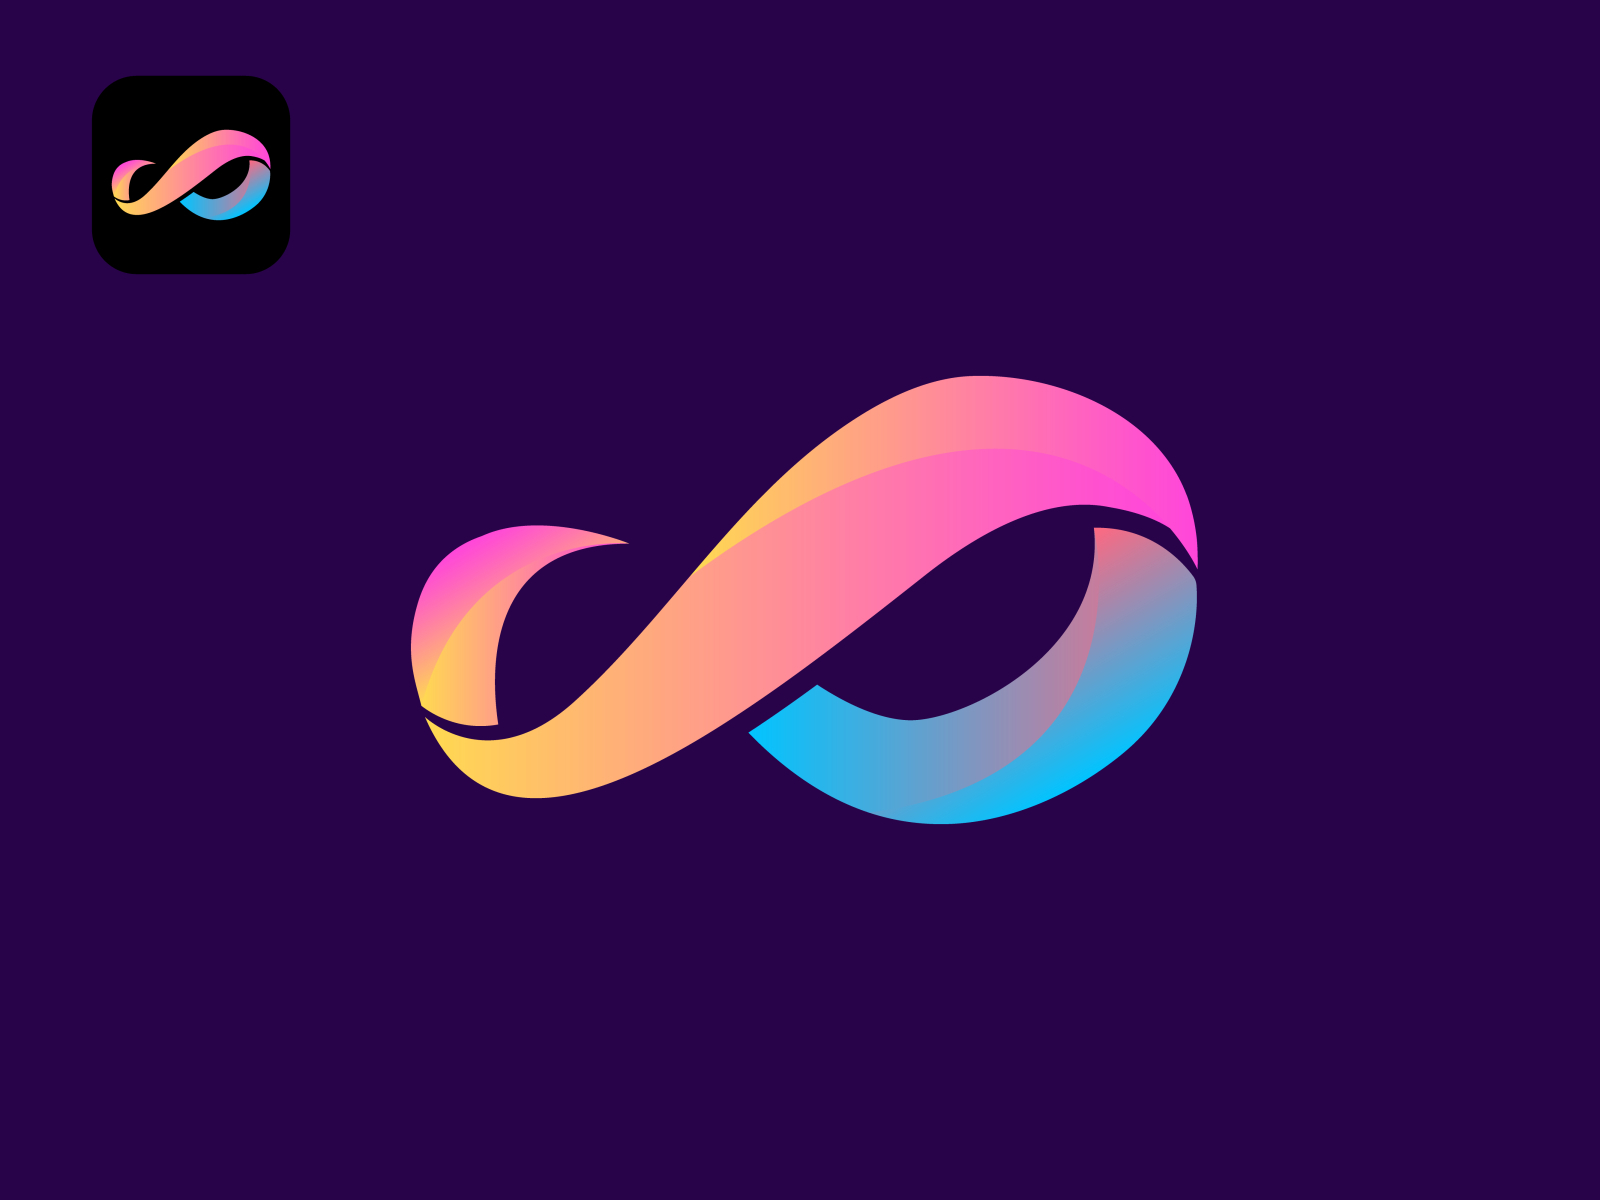 Abstract M gradient logo template by M. Shamsuddin on Dribbble